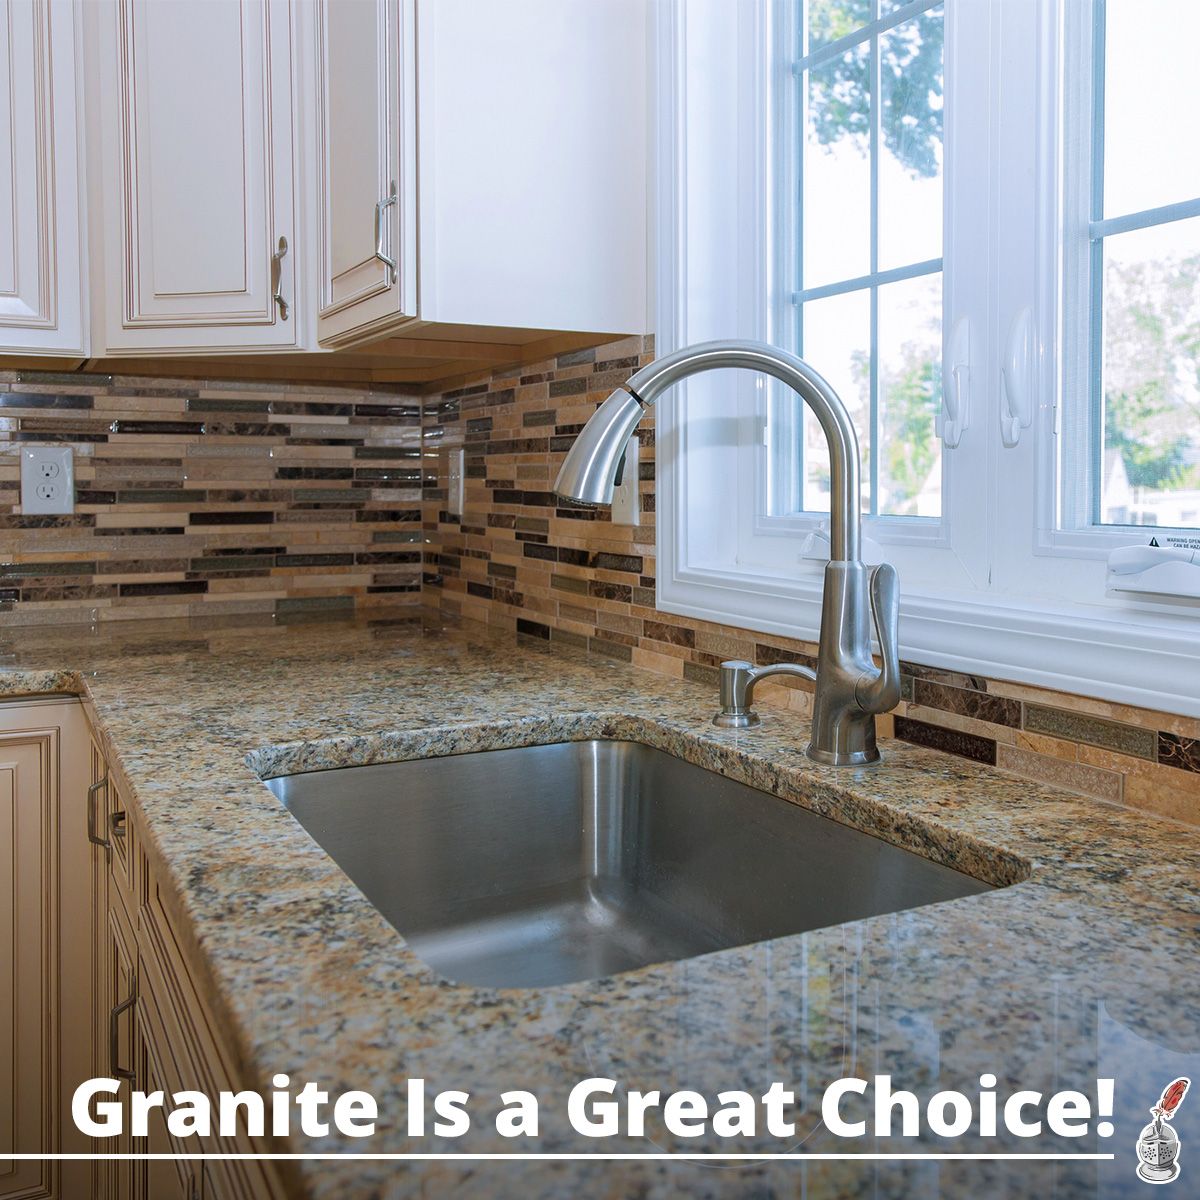 Granite Is a Great Choice!